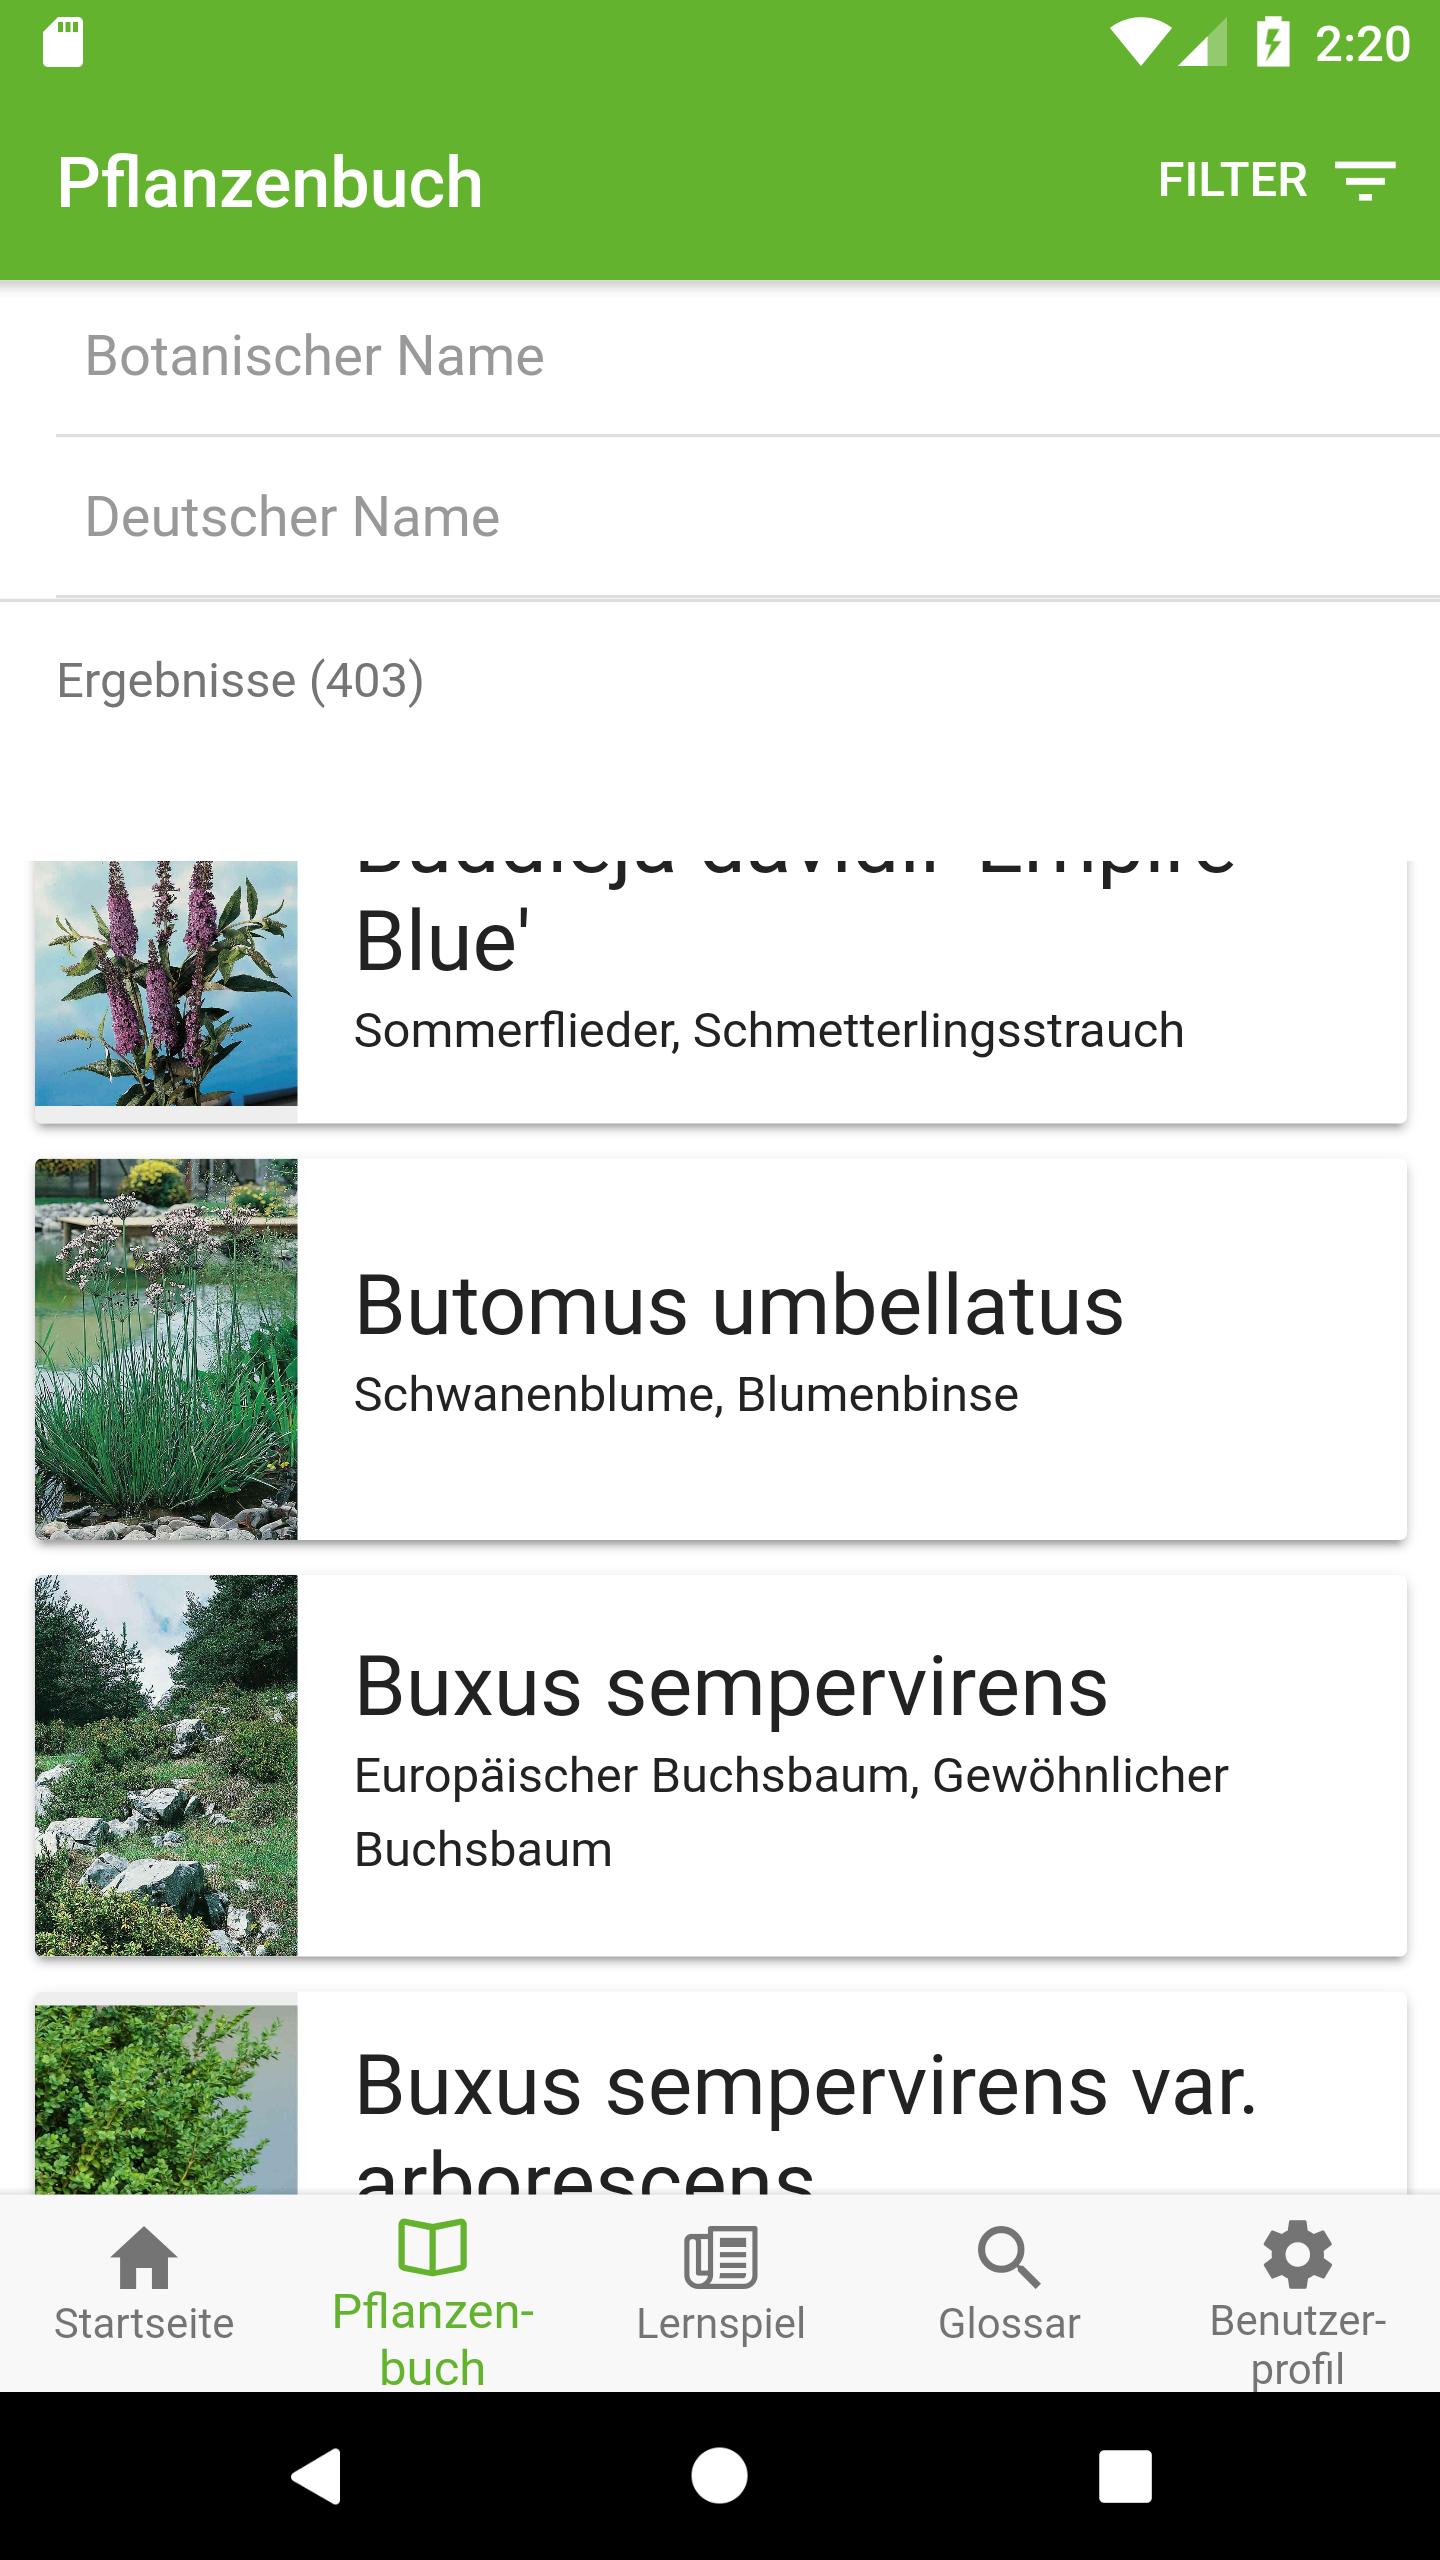 GaLaBau Pflanzen for Android - APK Download